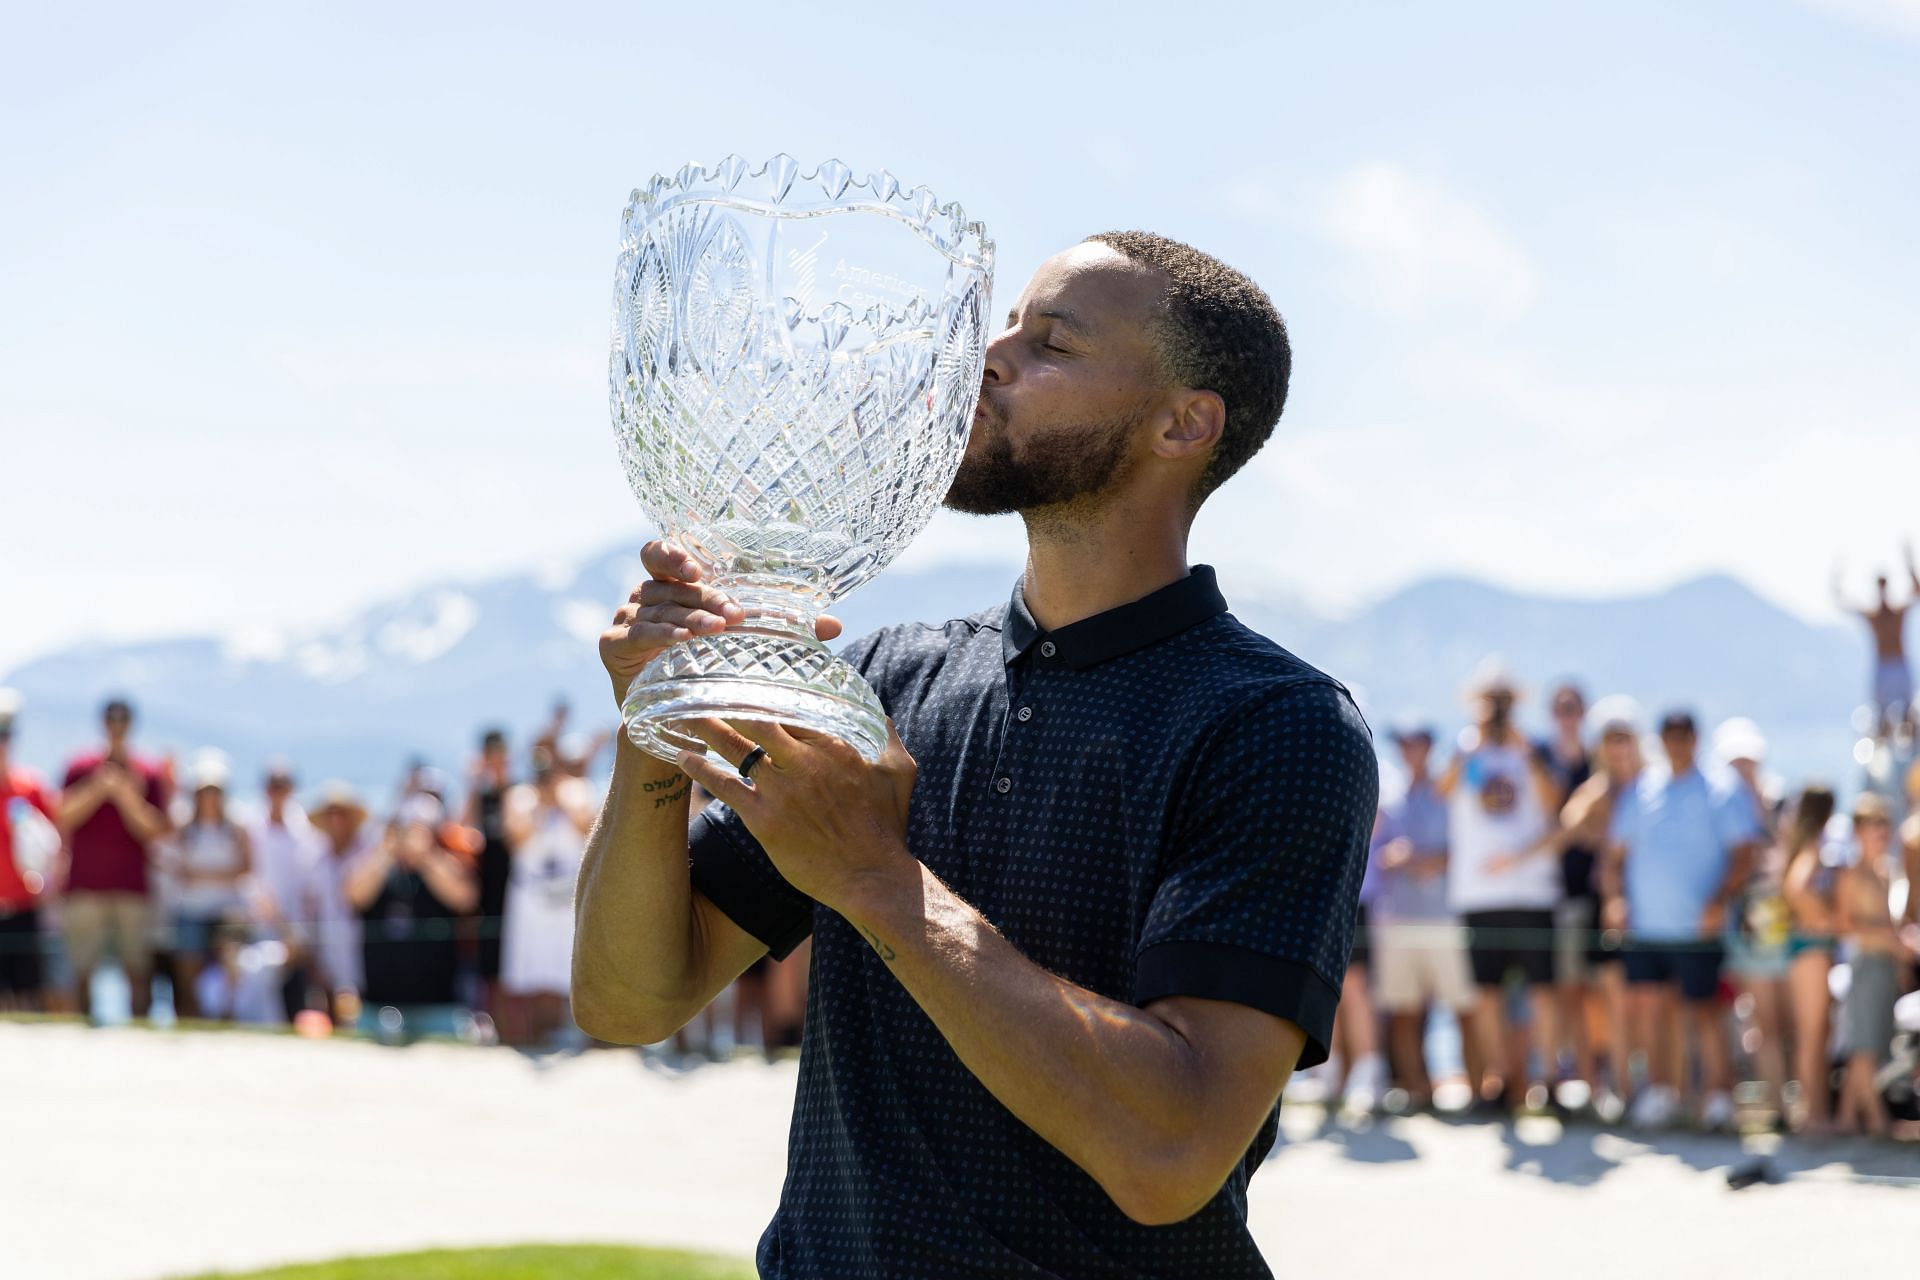 Steph Curry has no plans to switch to golf, despite winning his first